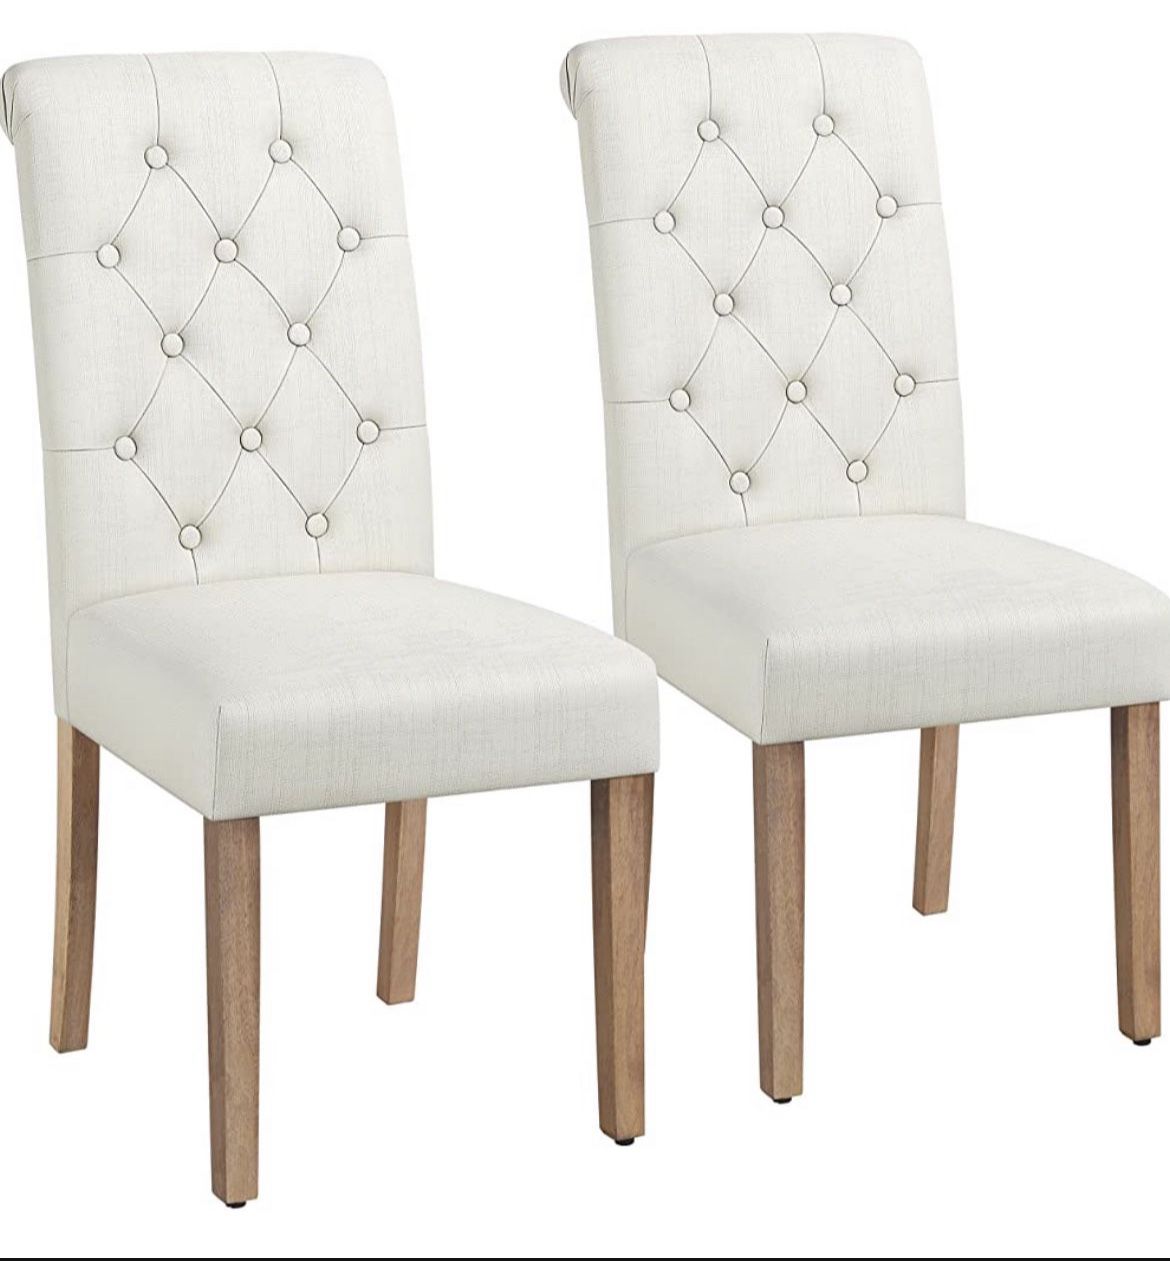 Set of 2 Beige upholstered dining chairs (R) 591716